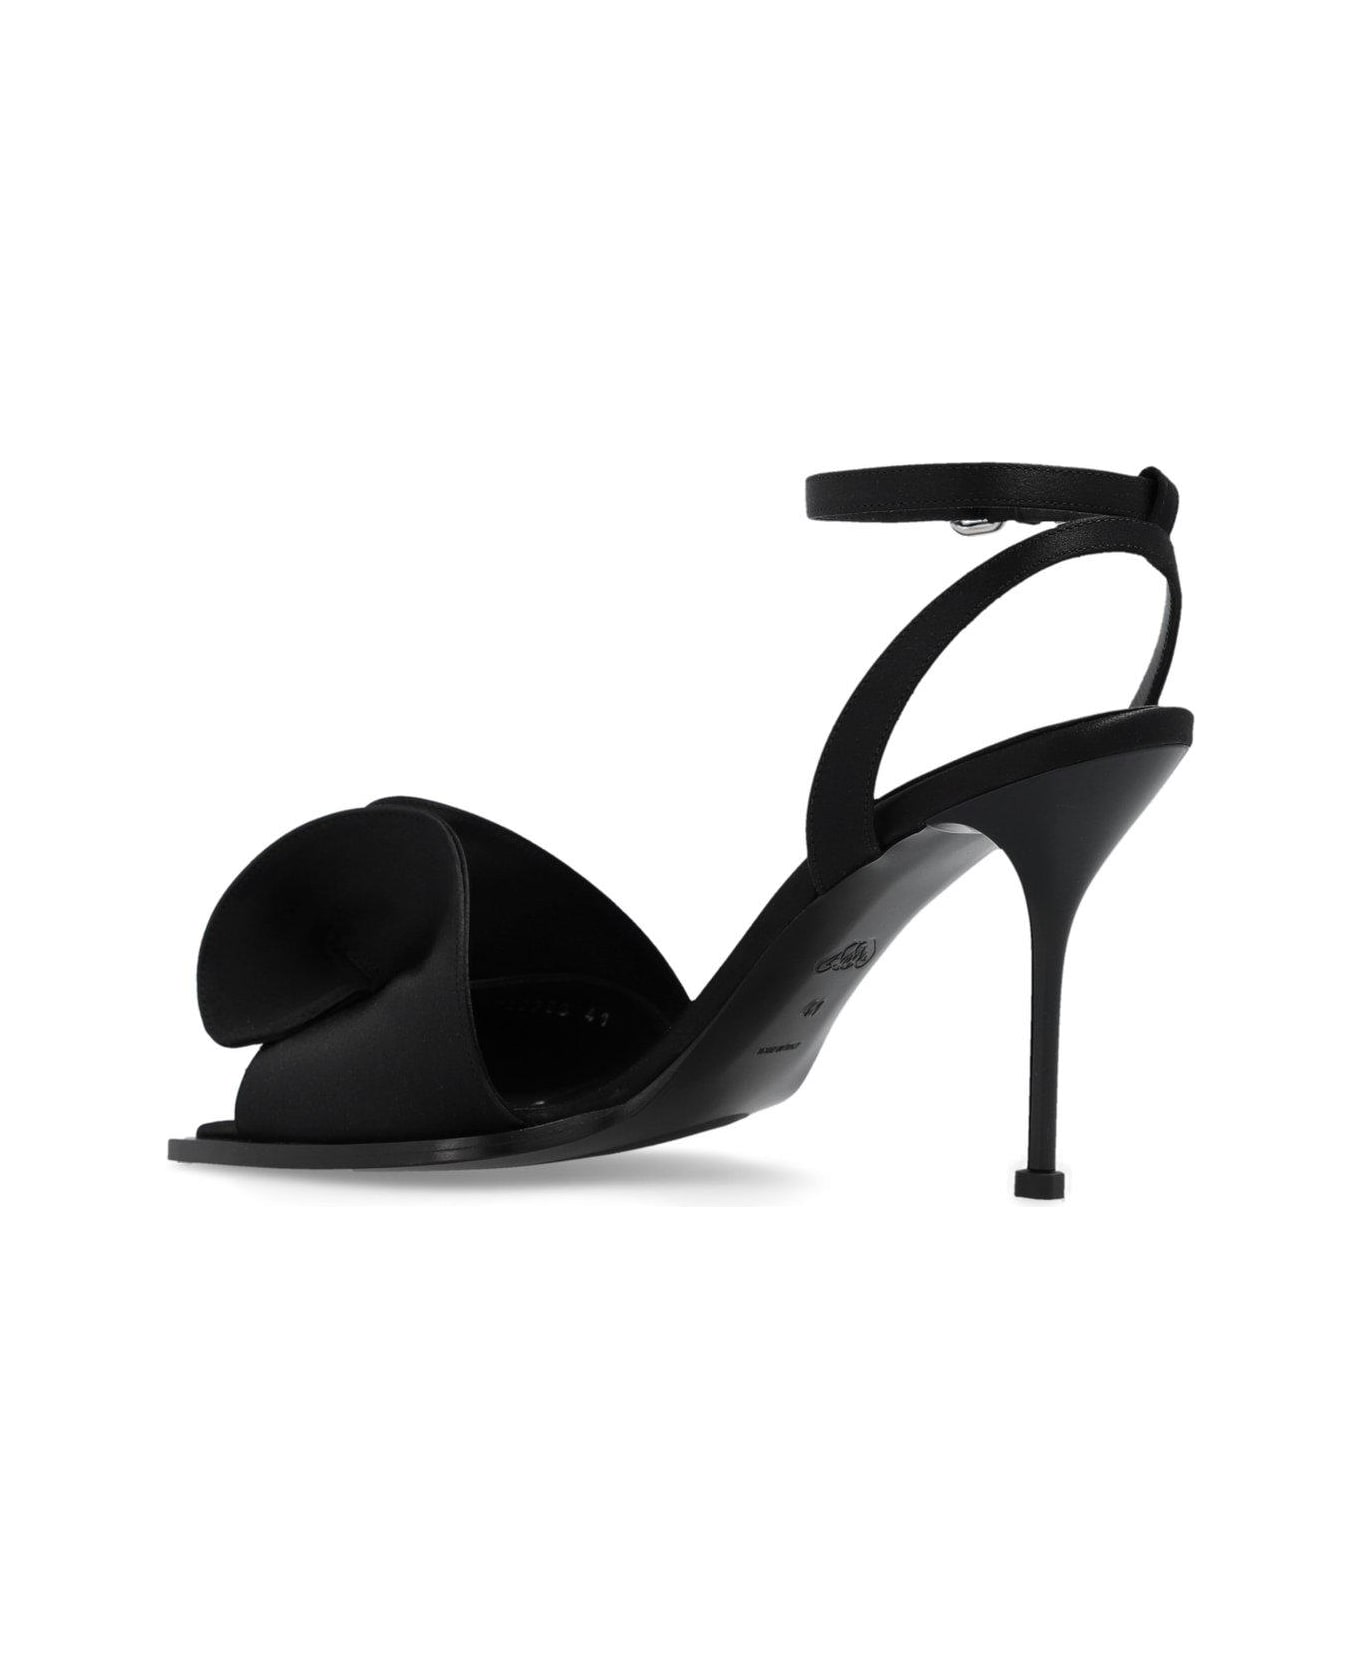 Alexander McQueen Ankle-strapped Heeled Sandals - Black サンダル